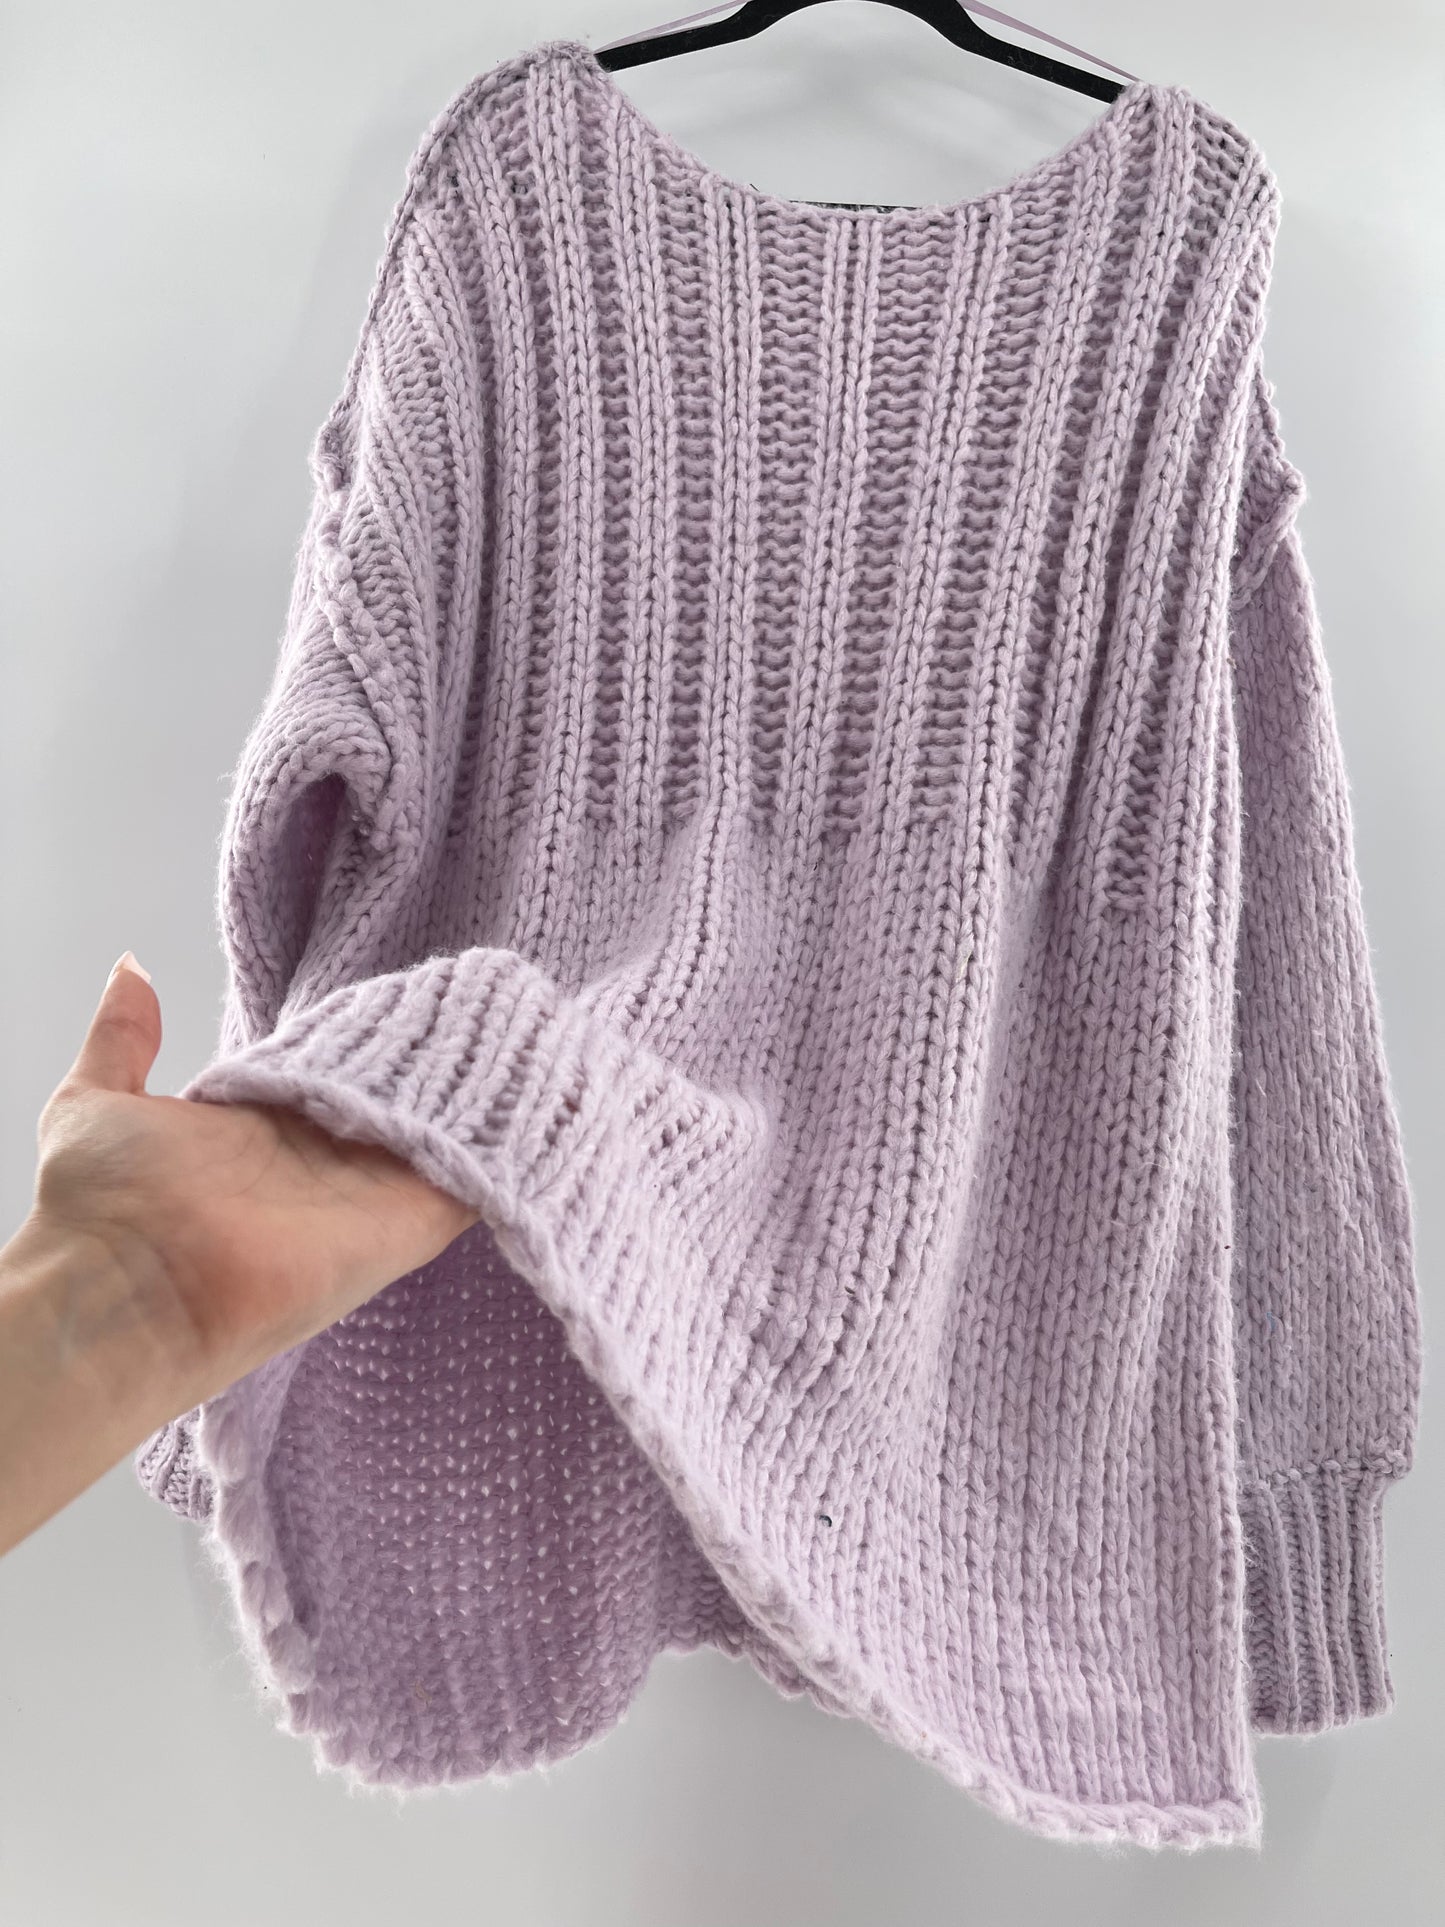 Free People Chunky Knit Lilac/Lavender Sweater (Medium)